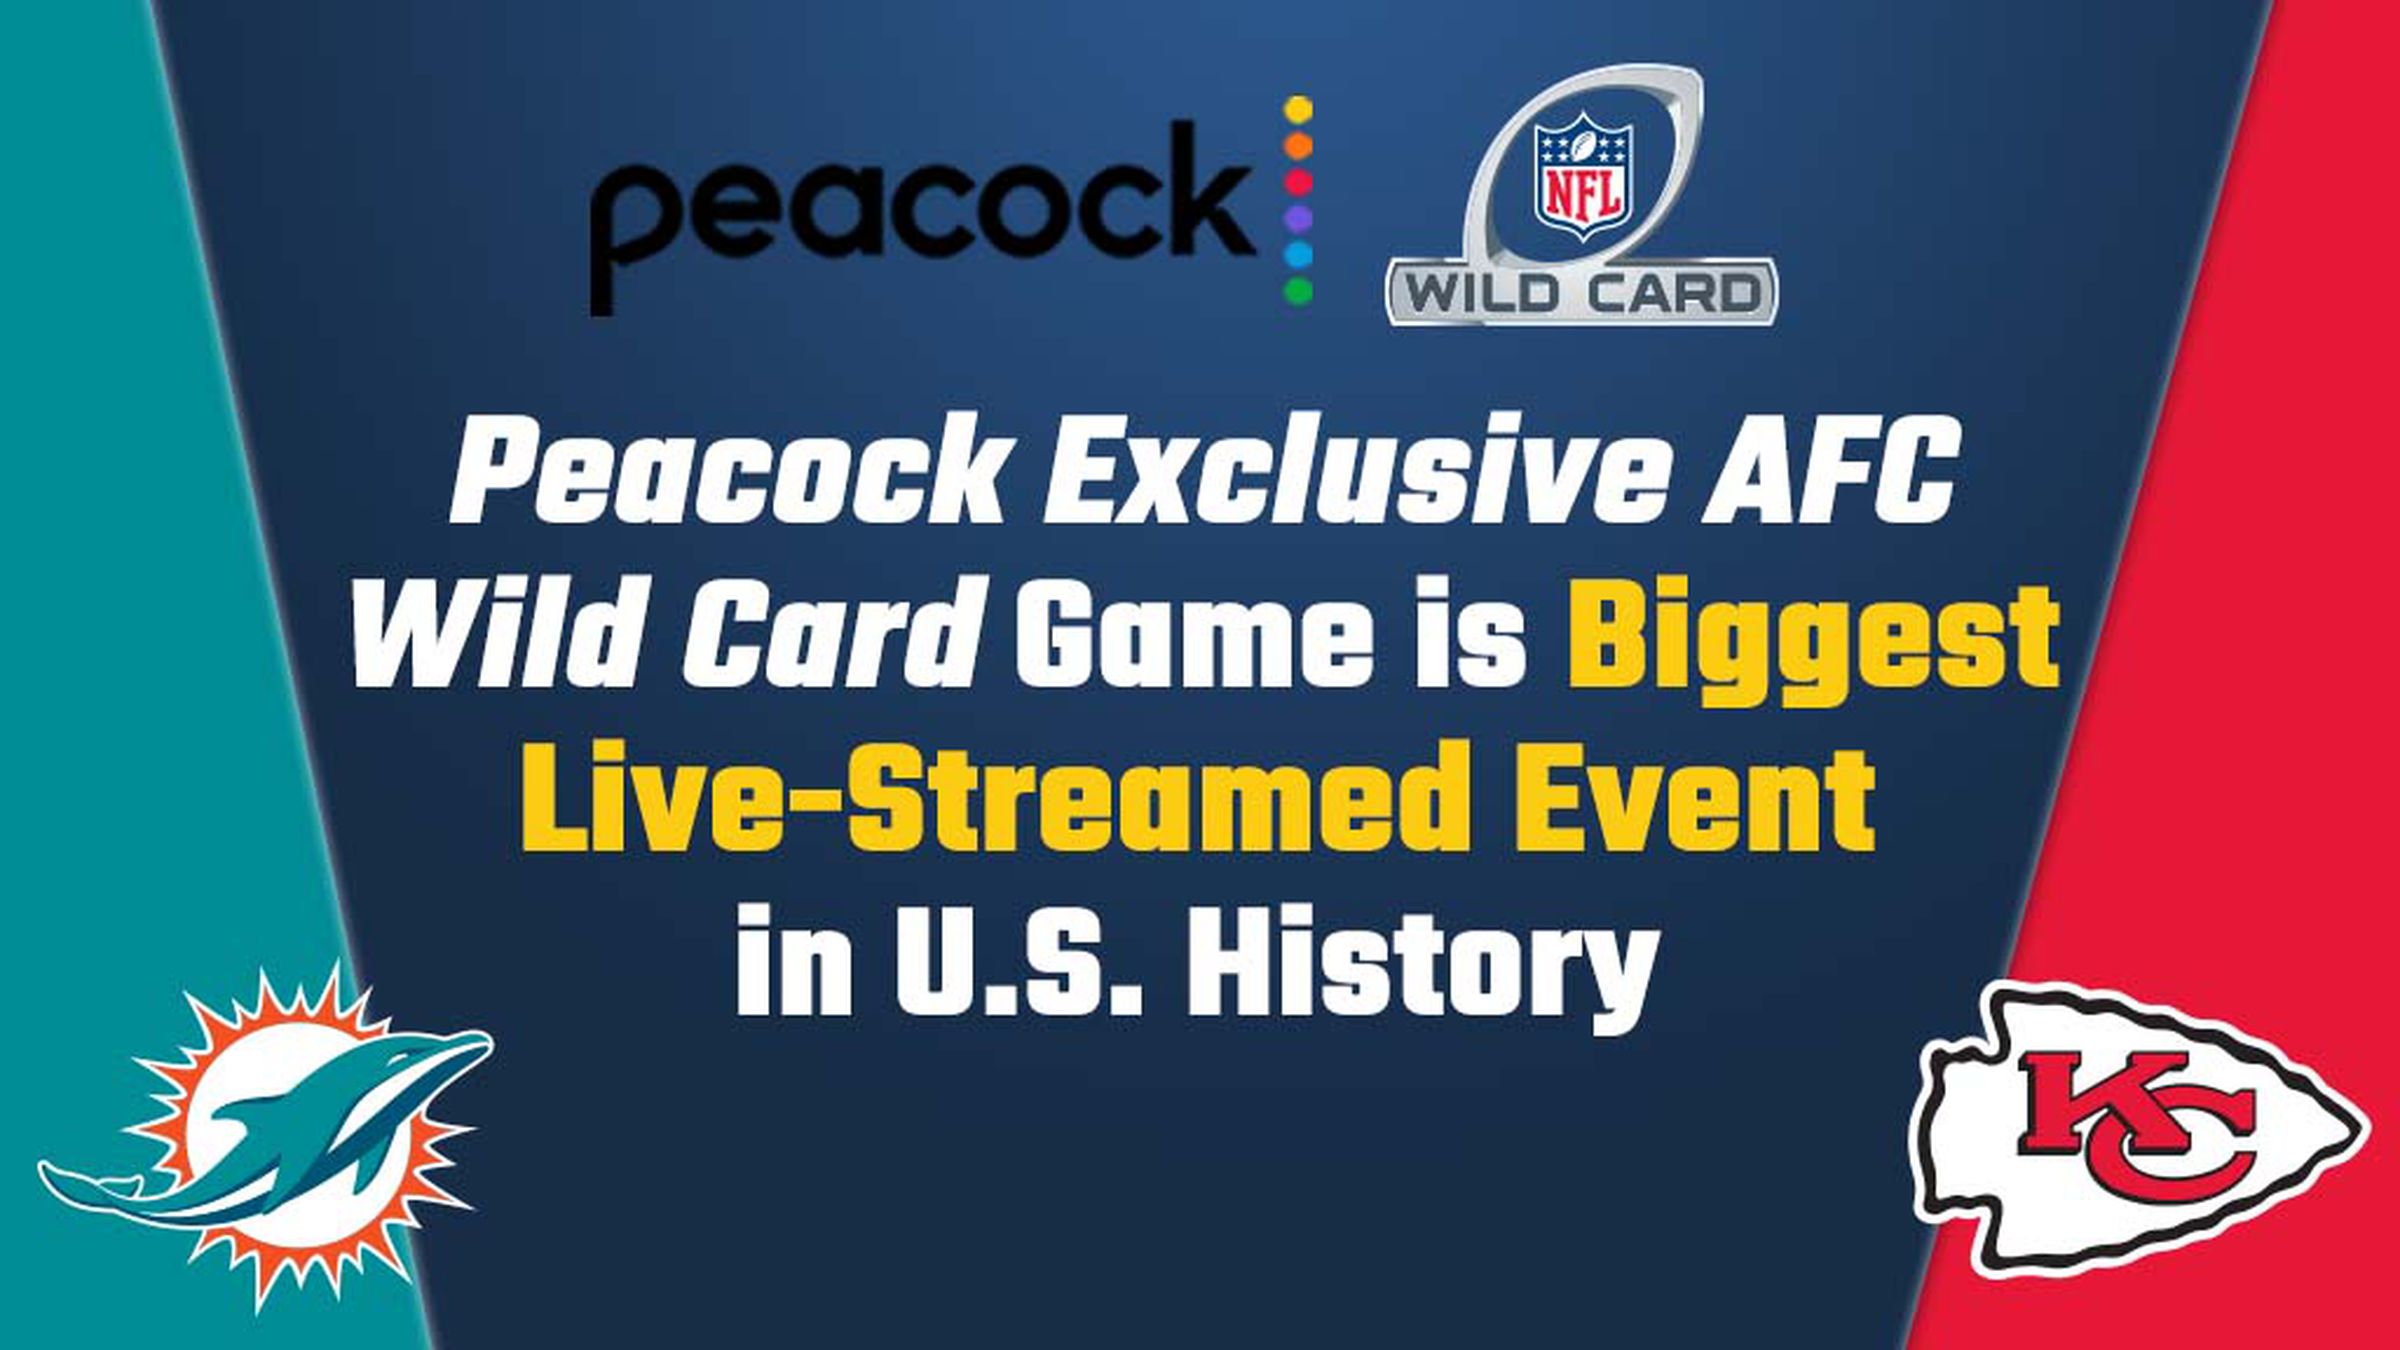 Image reading "Peacock Exclusive AFC Wild Card Game is Biggest Live-Streamed Event in U.S. History" 